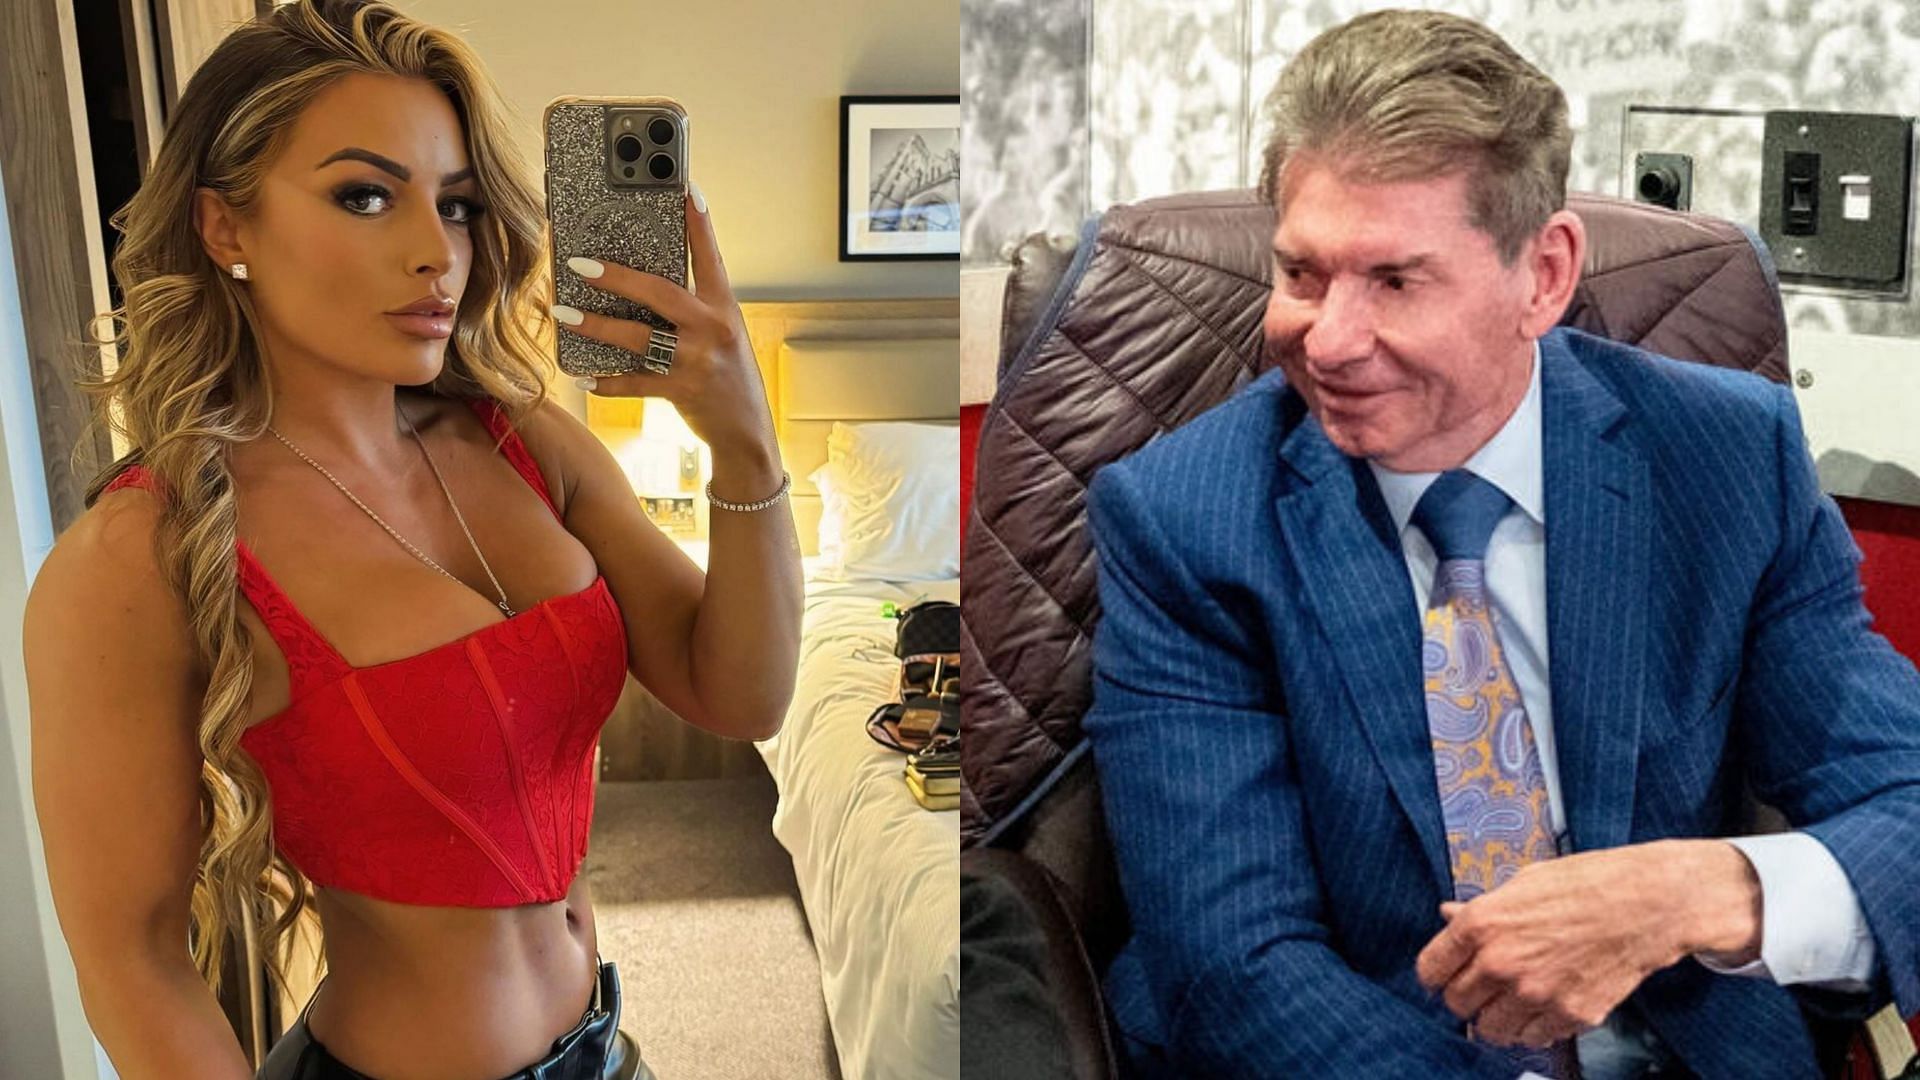 Mandy Rose (left) and former WWE Chairman Vince McMahon (right)